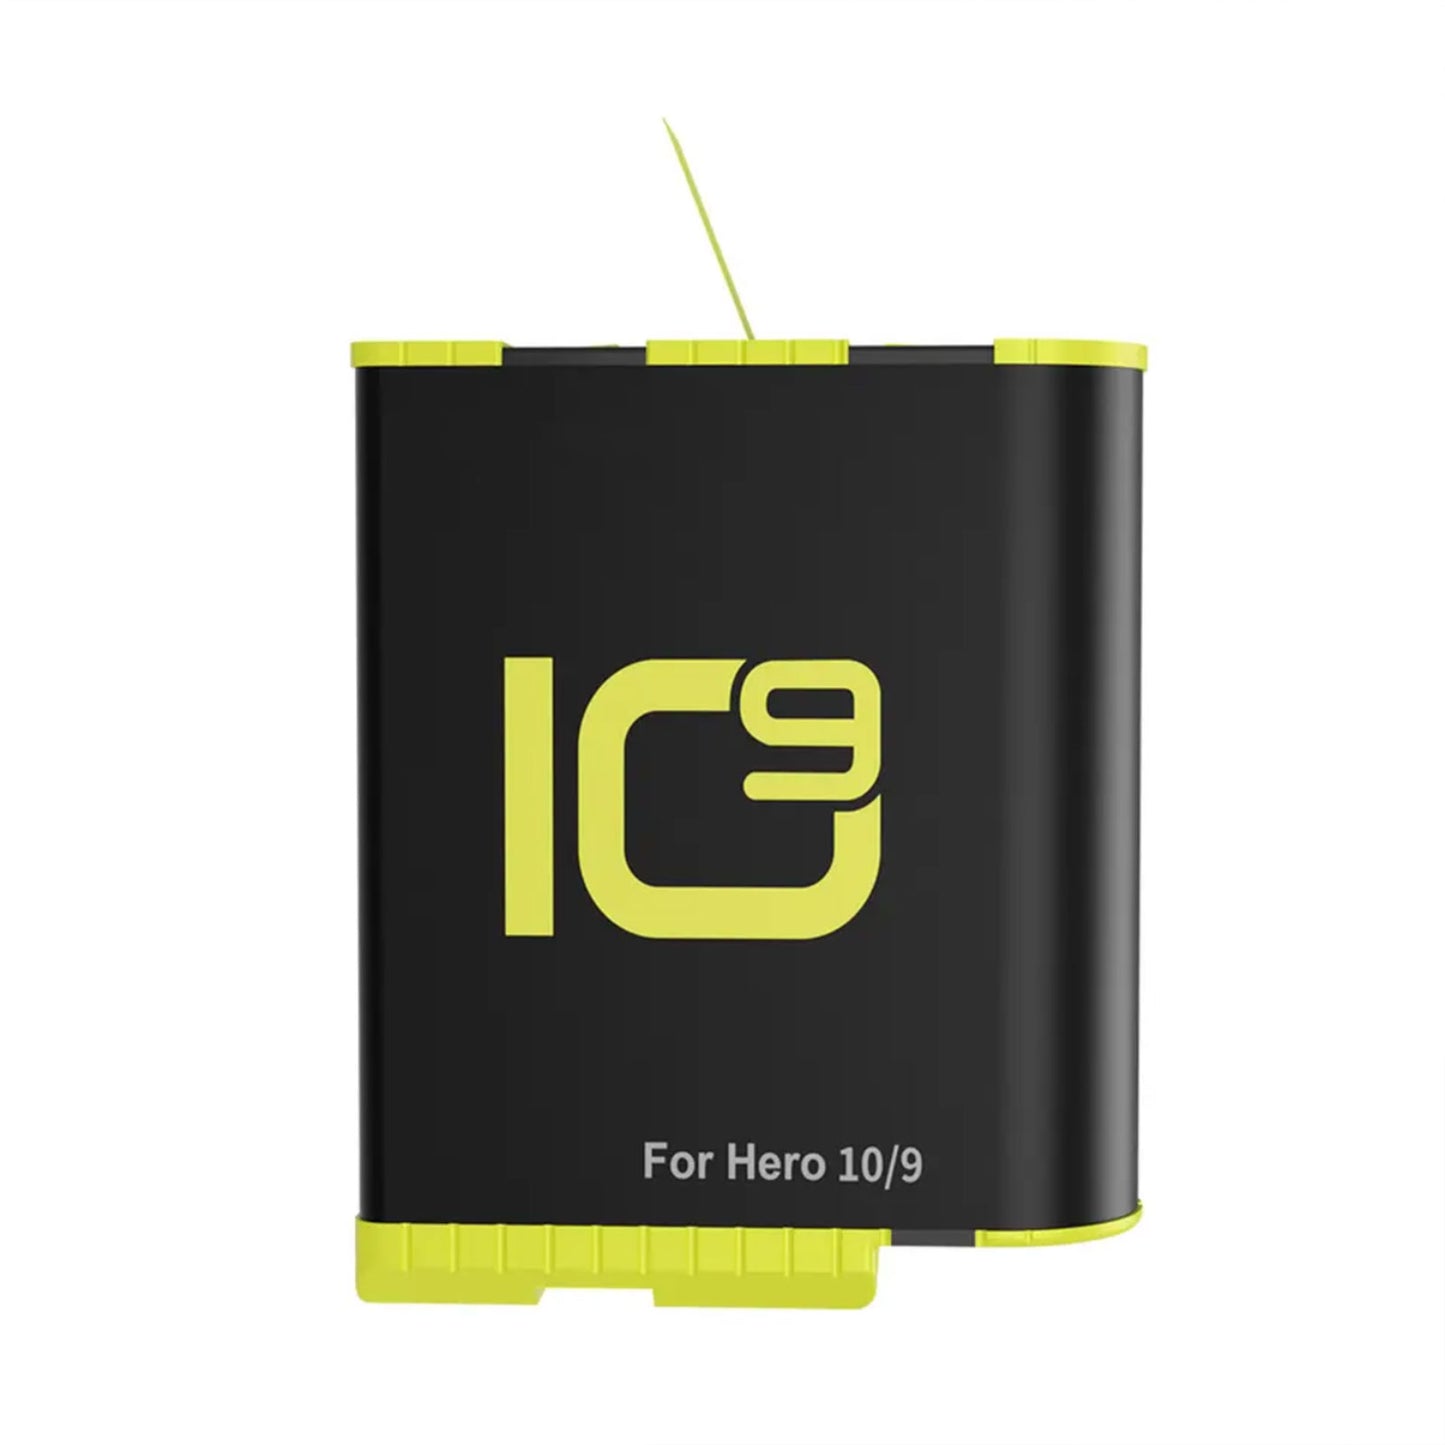 Hridz 3 channel Charger and 1800mAh Battery for GoPro Hero 11 10 9